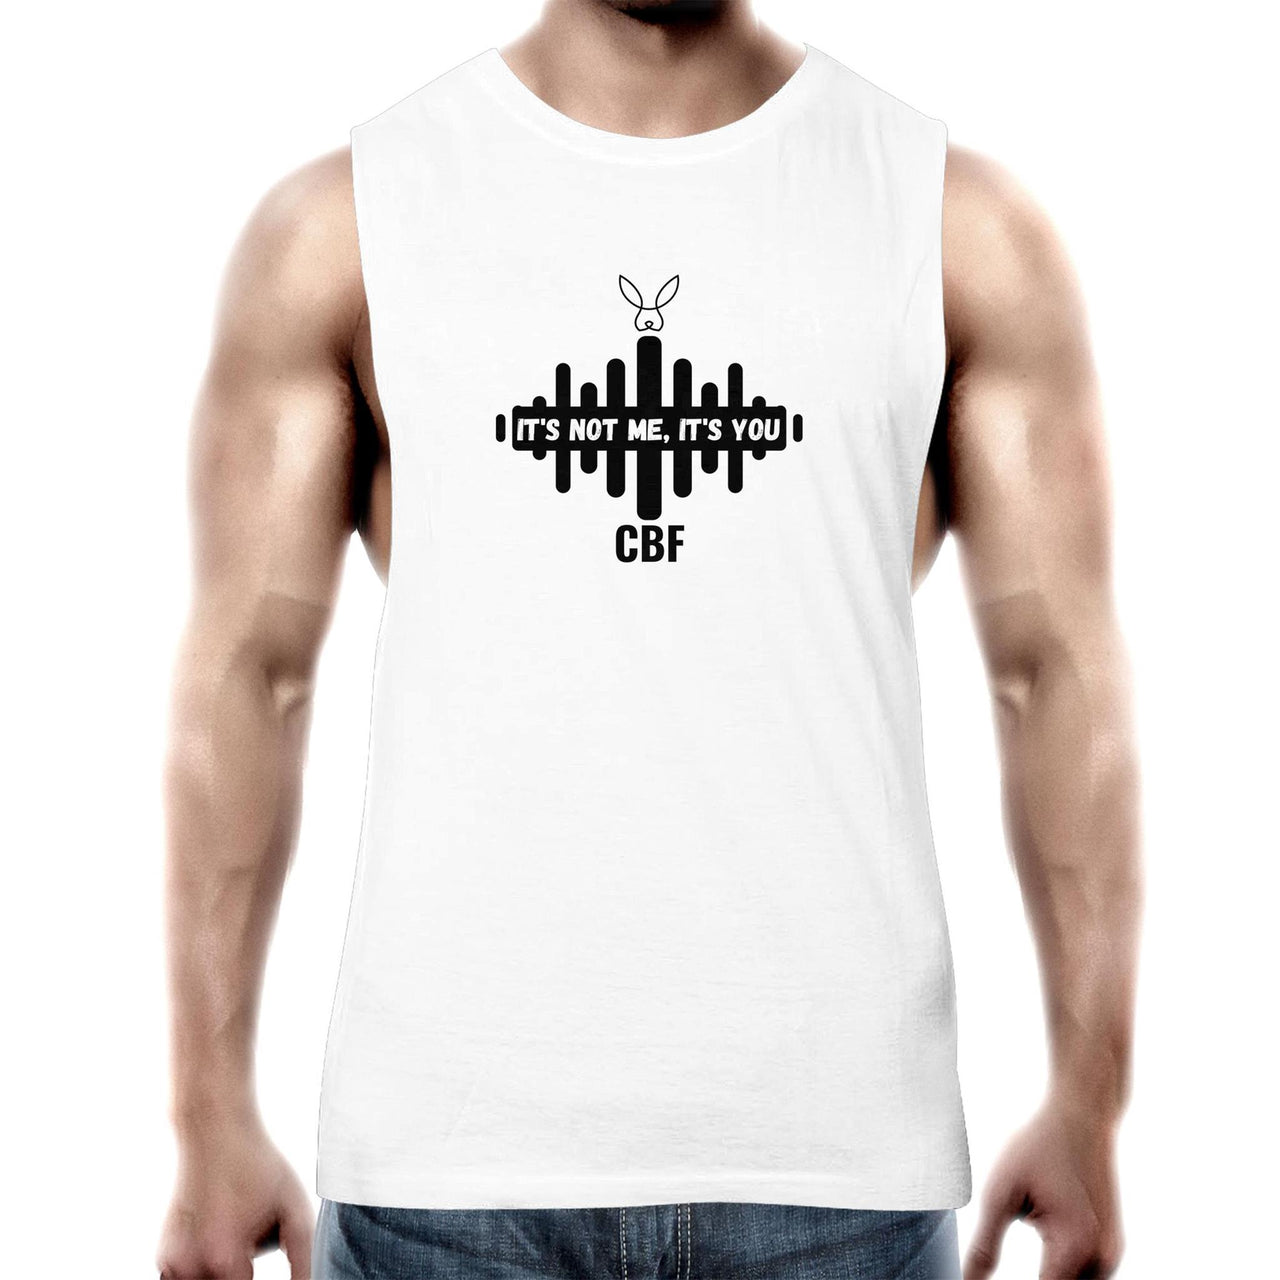 Not Me it's You Tank Top Tee by CBF Clothing in White